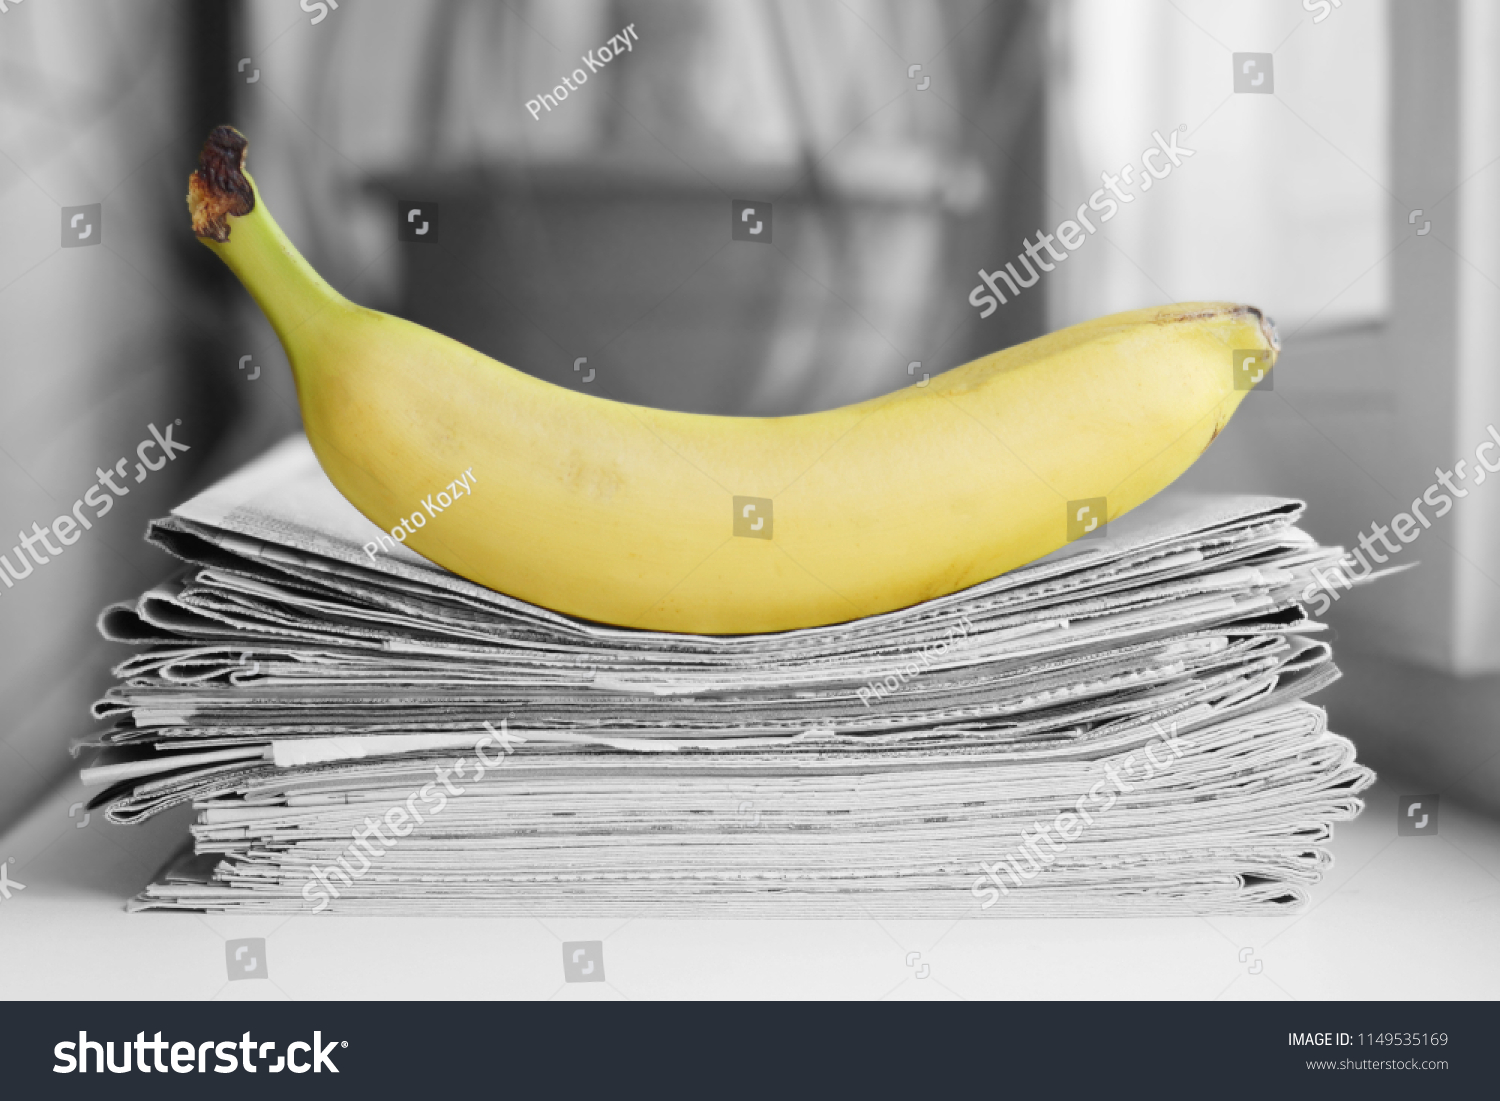 Stack of newspapers and banana. Daily journals with headlines and articles and fresh fruits. Concept for juicy news                                    #1149535169